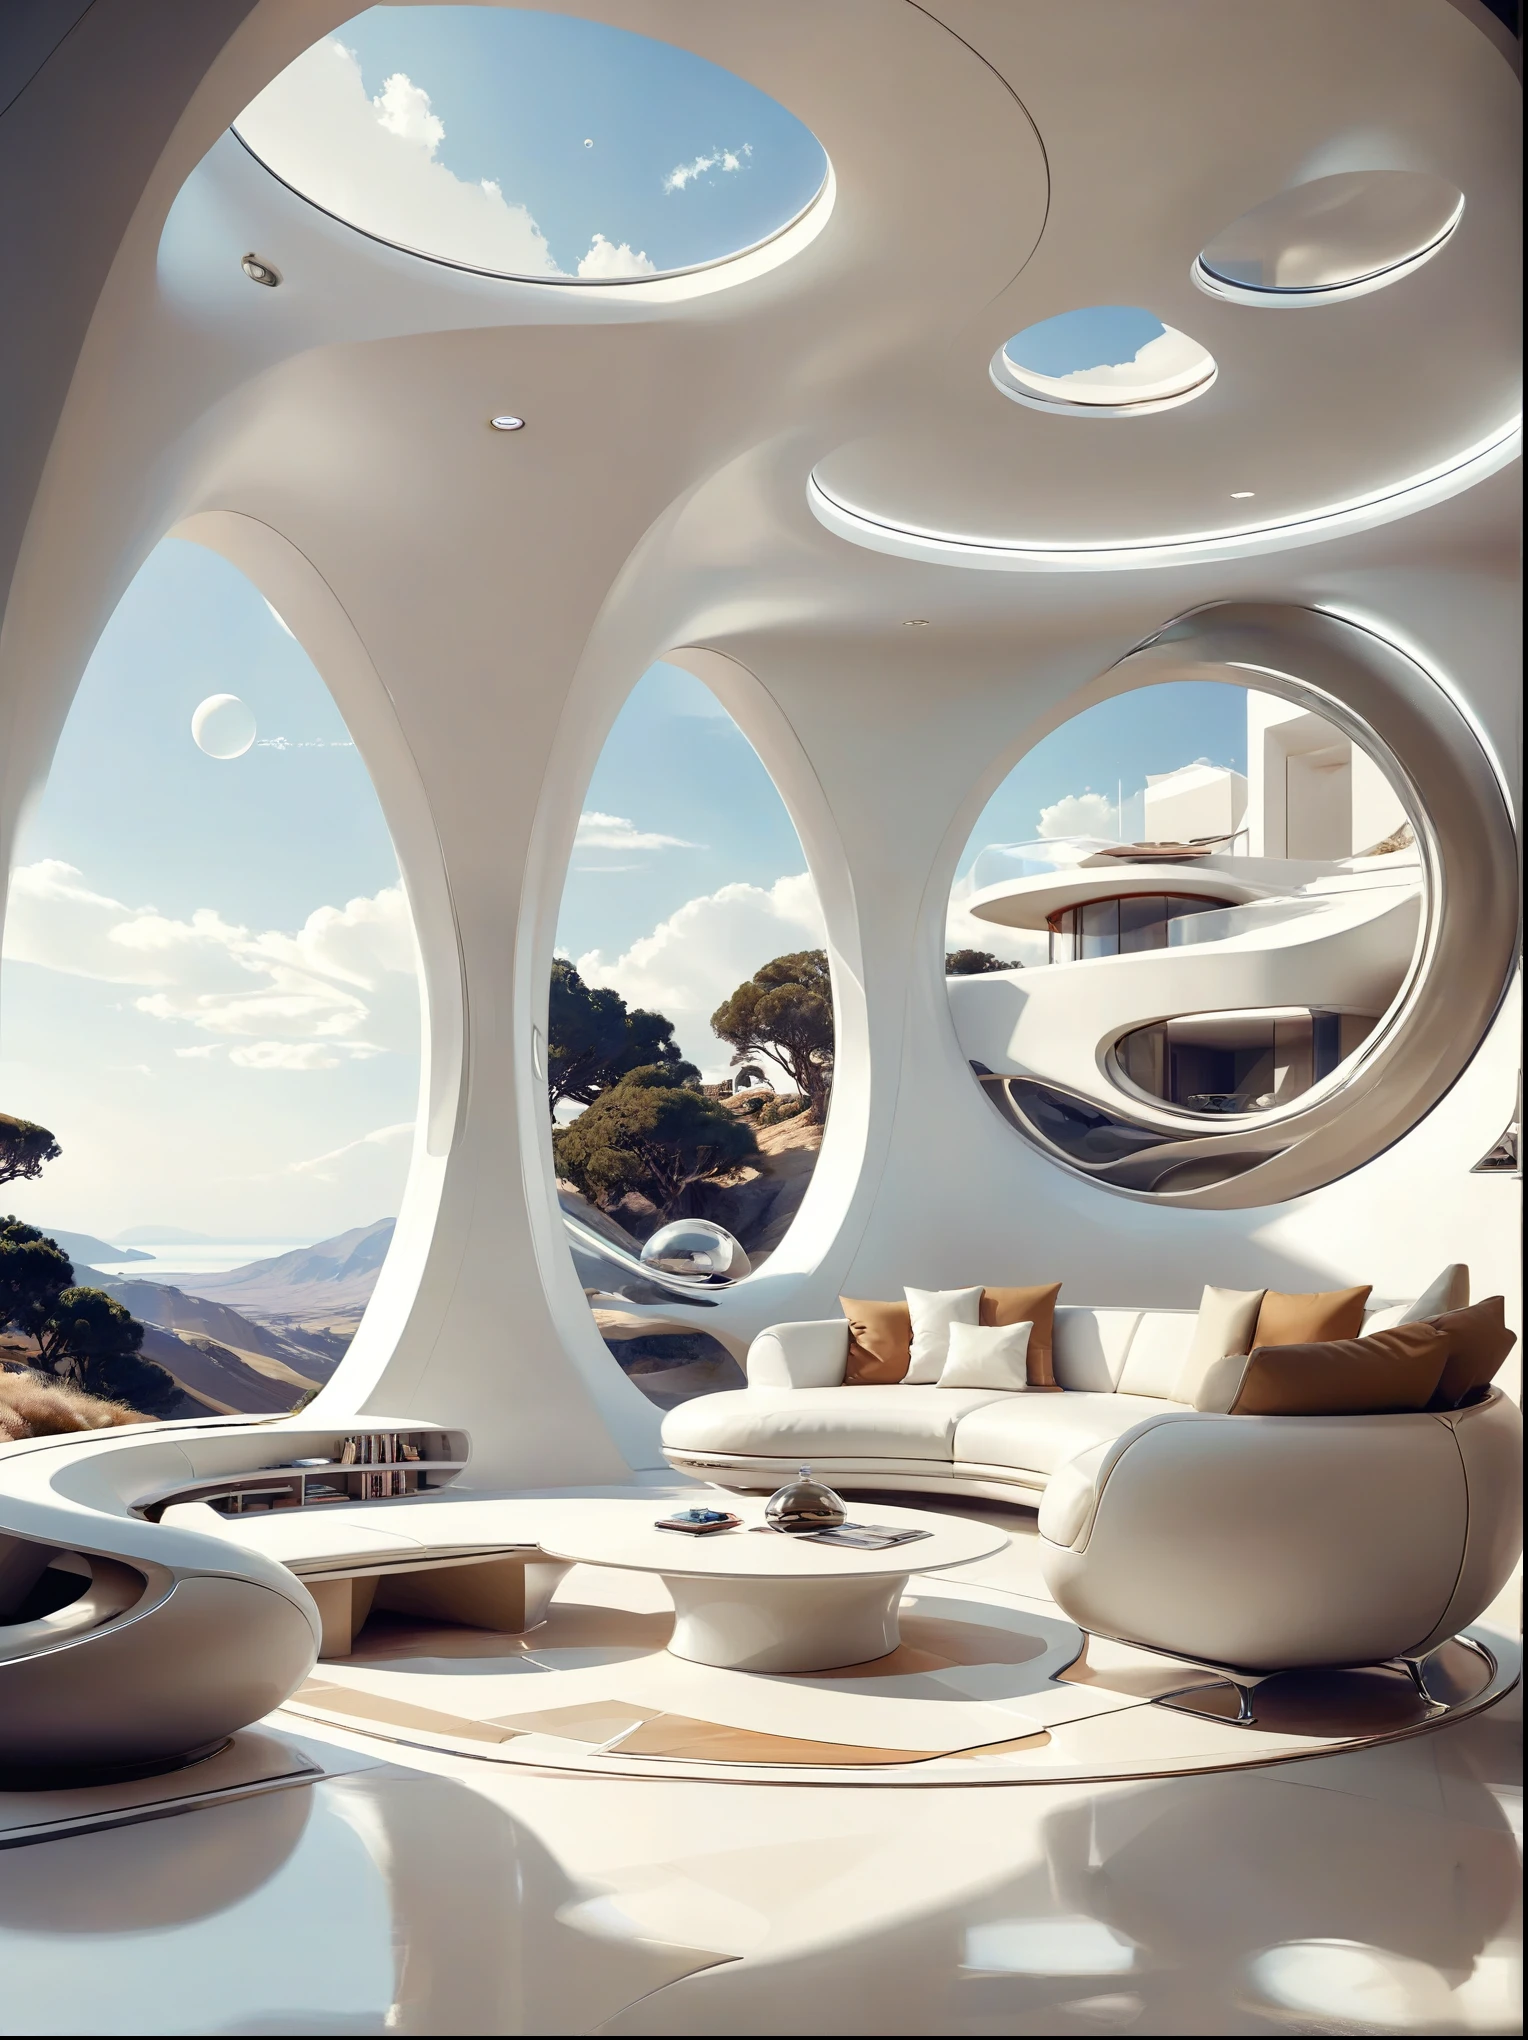 Living room study concept for futuristic home incorporates organic fluidity、Circles and geometric shapes，and use artistic imagination to render houses and landscapes, Pure white technology style，Spacious indoor space